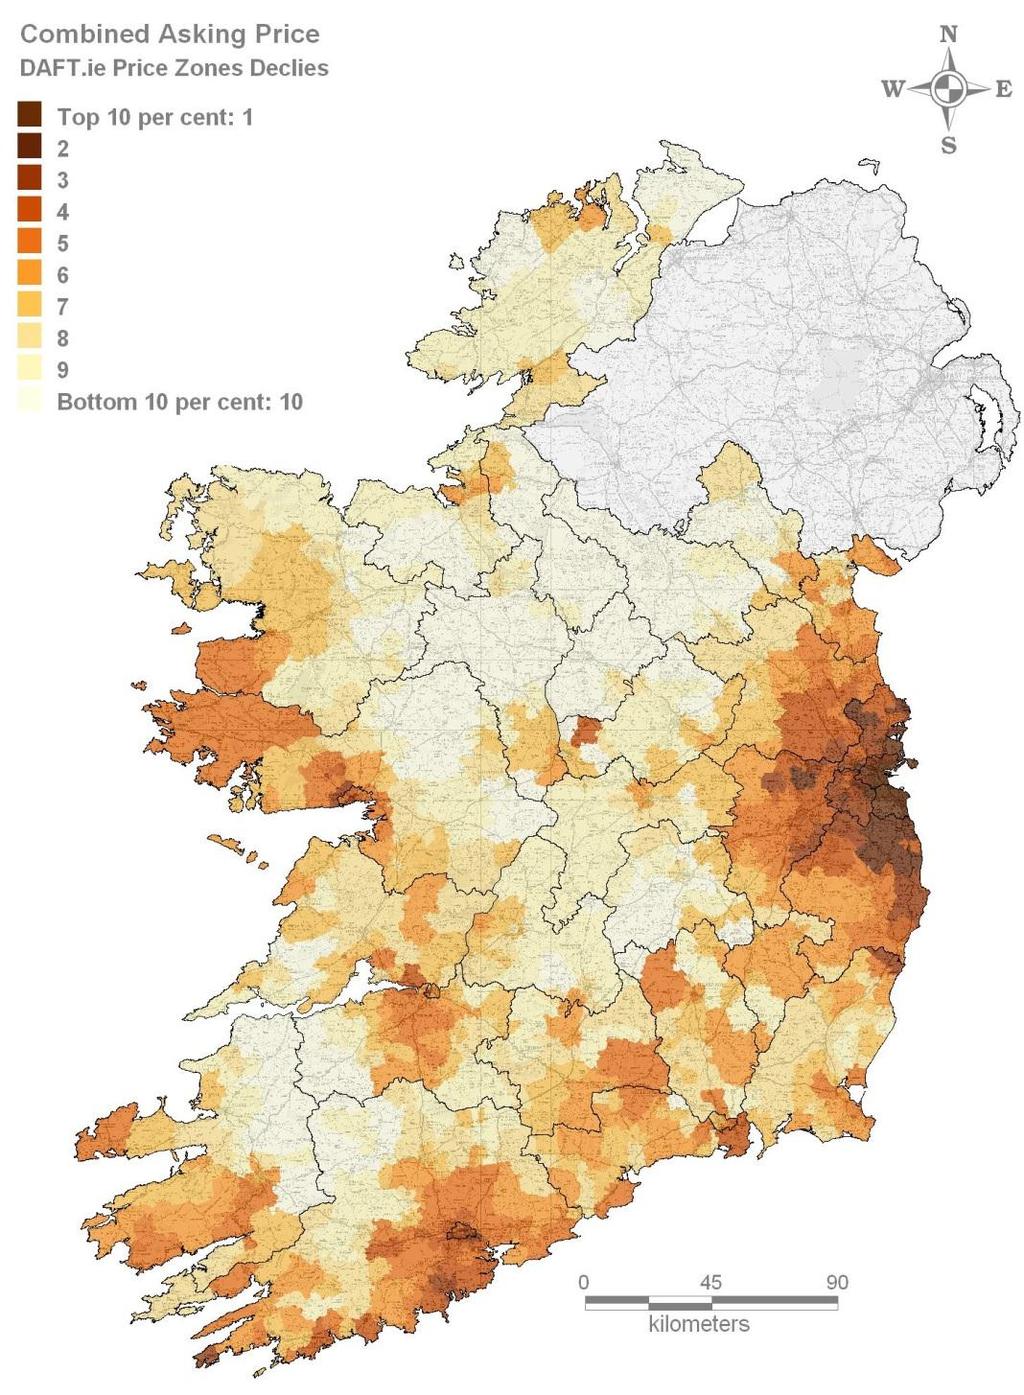 Figure 1(a): Contours of site value in Ireland, by decile, 2006-2011 Source: Identify Consulting analysis, using